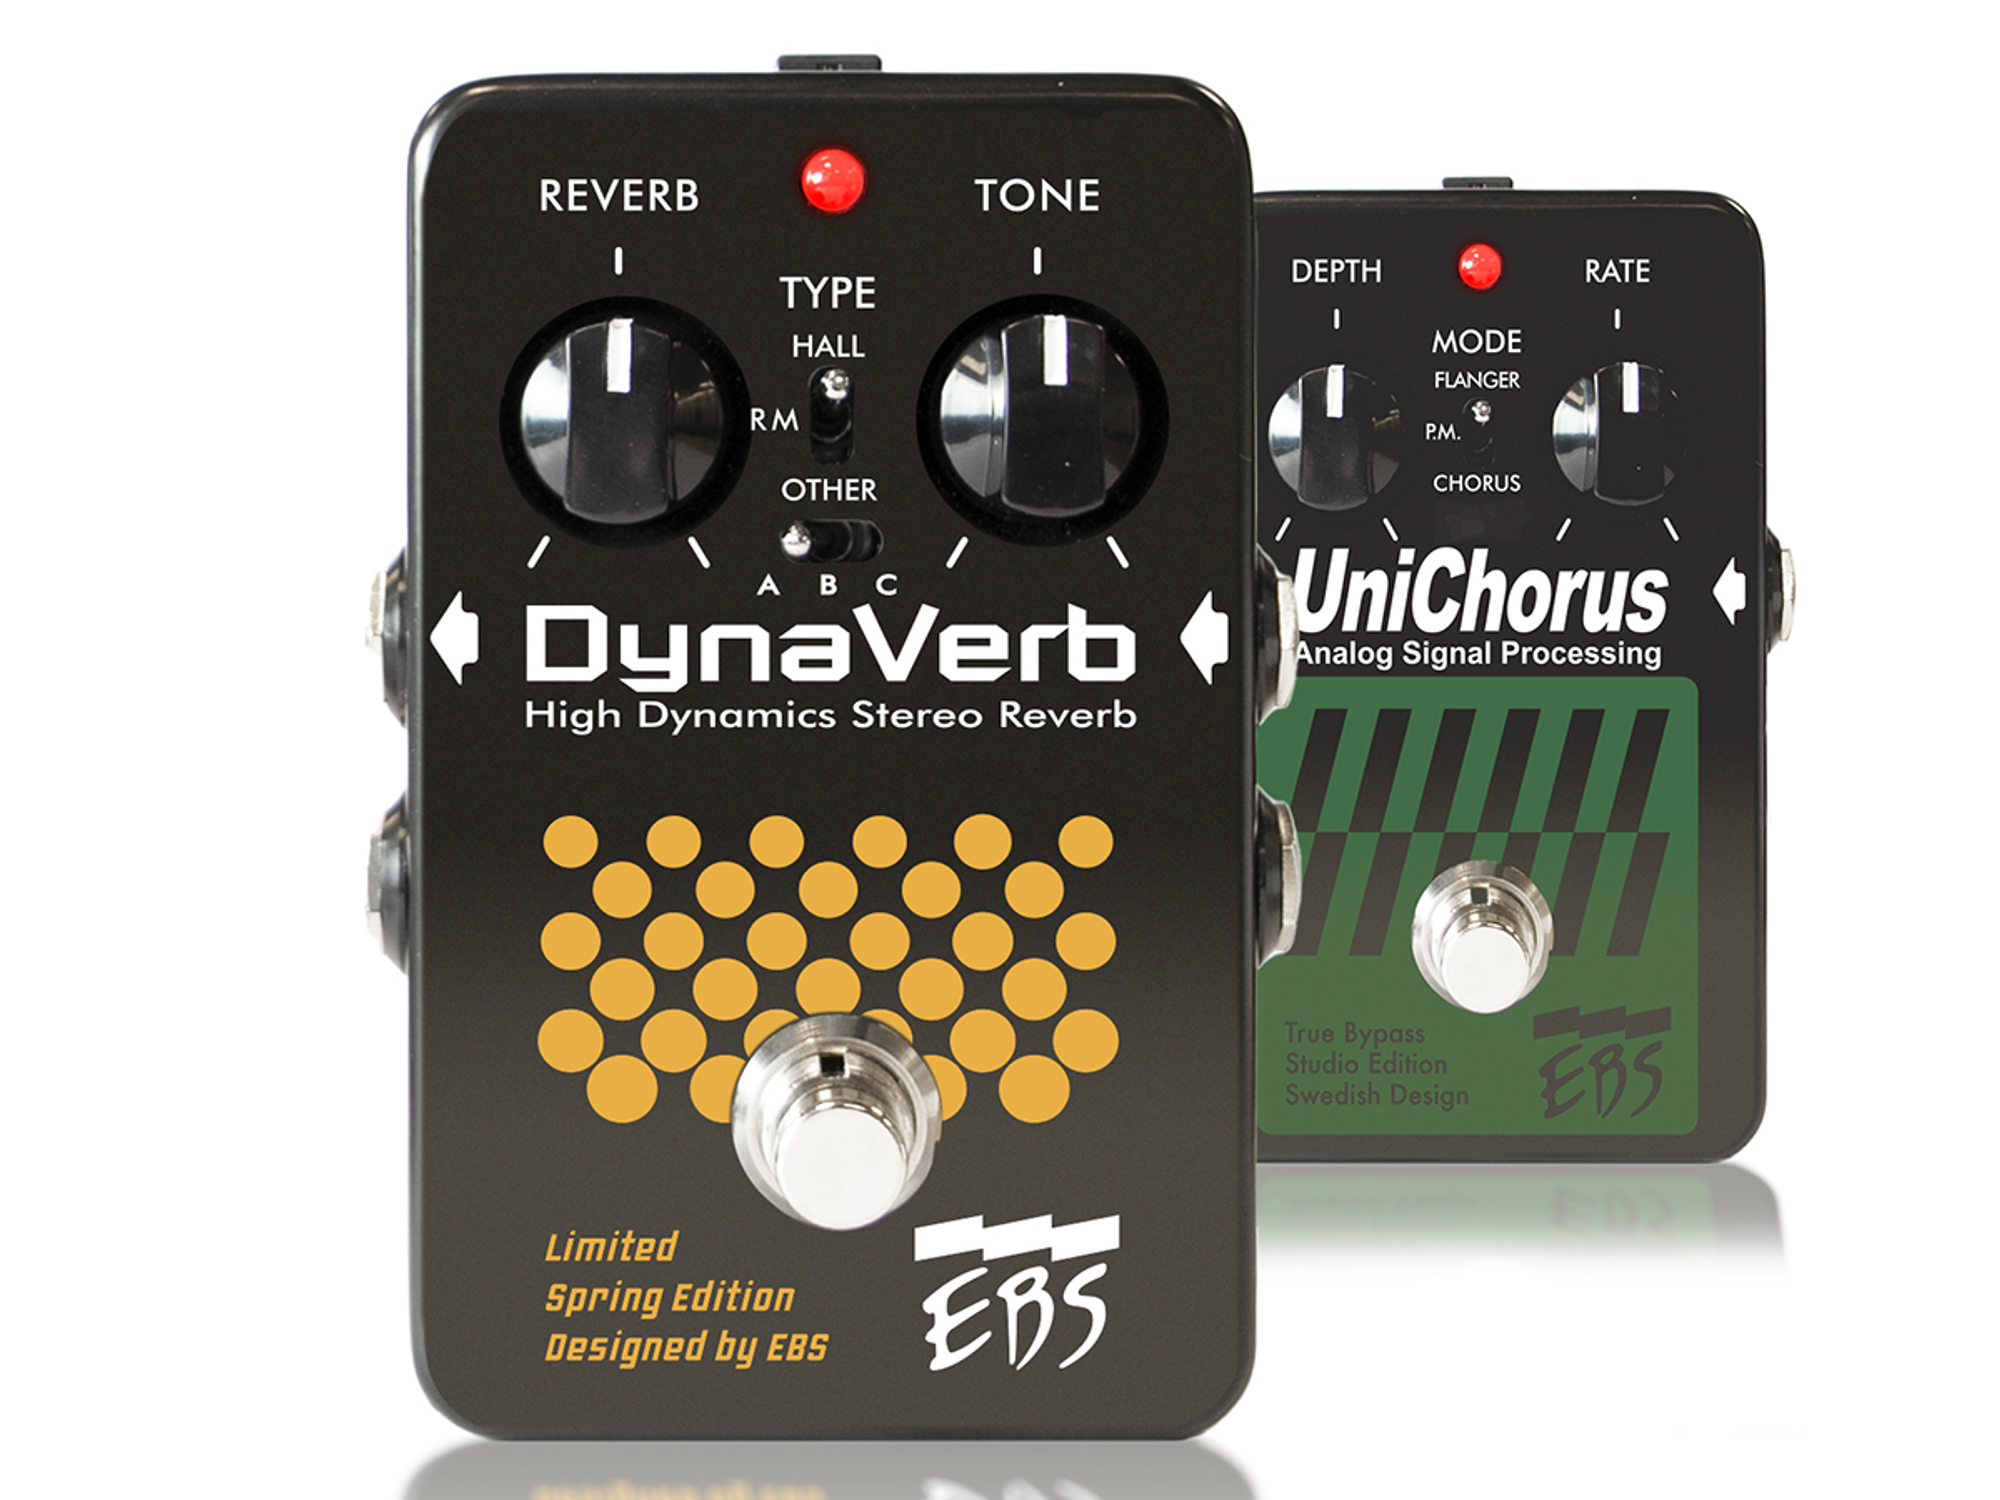 EBS Launches DynaVerb Limited Spring Edition and Relaunch of the UniChorus